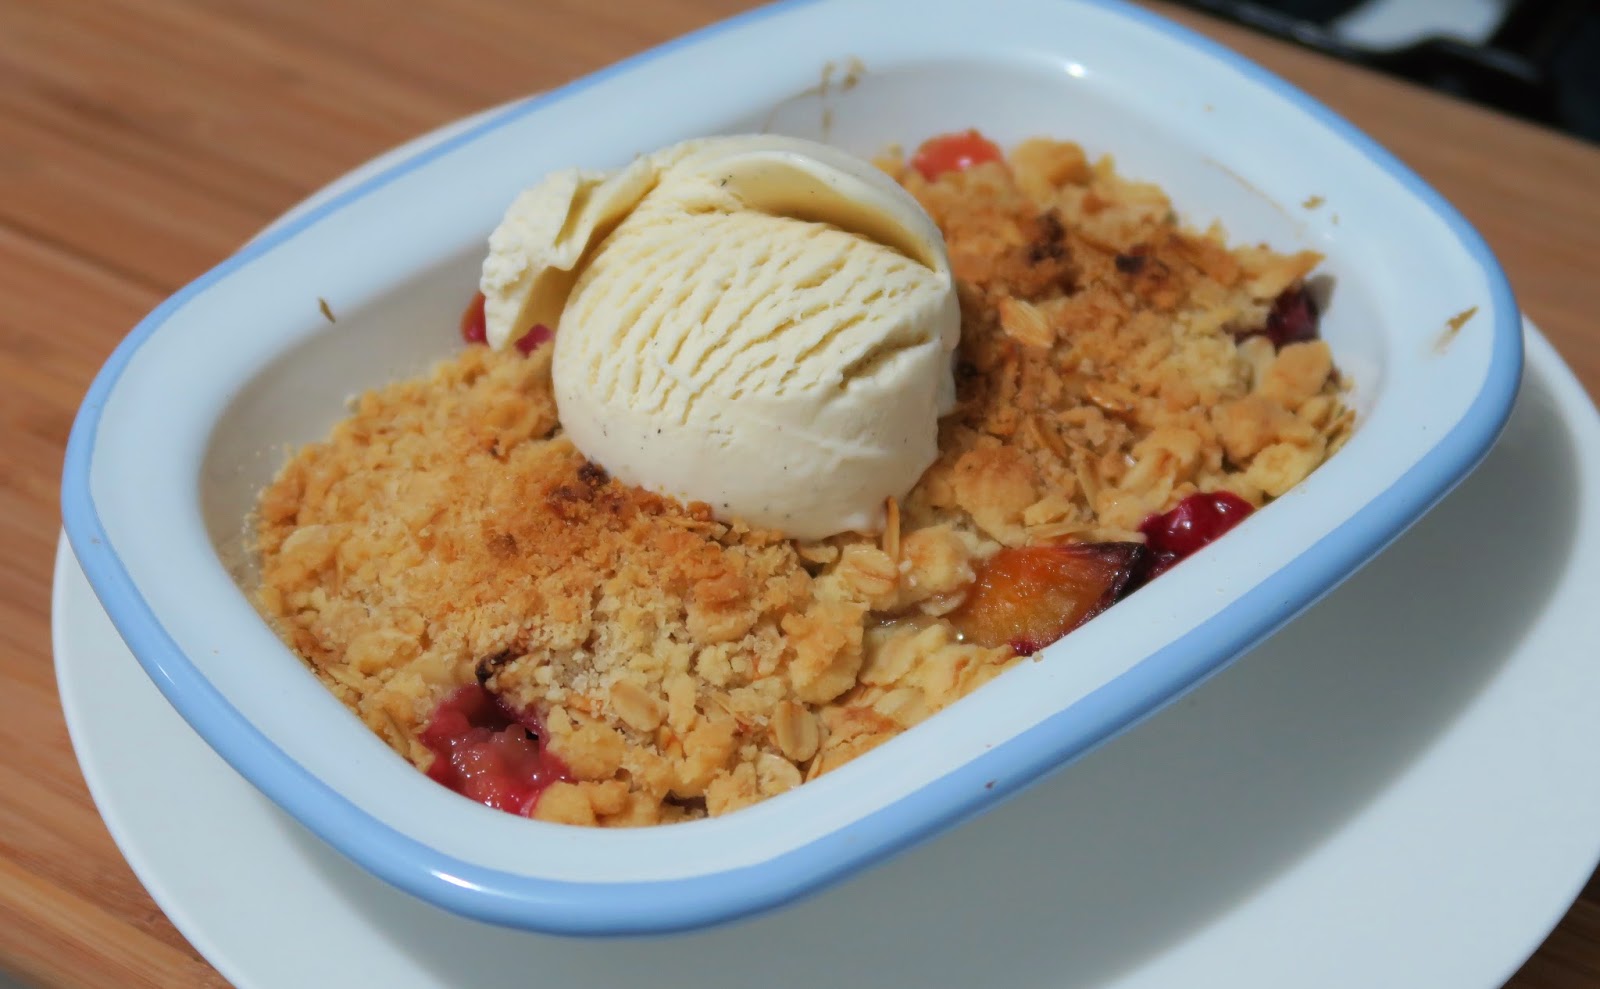 Plum crumble adapted from Nigella Lawson.